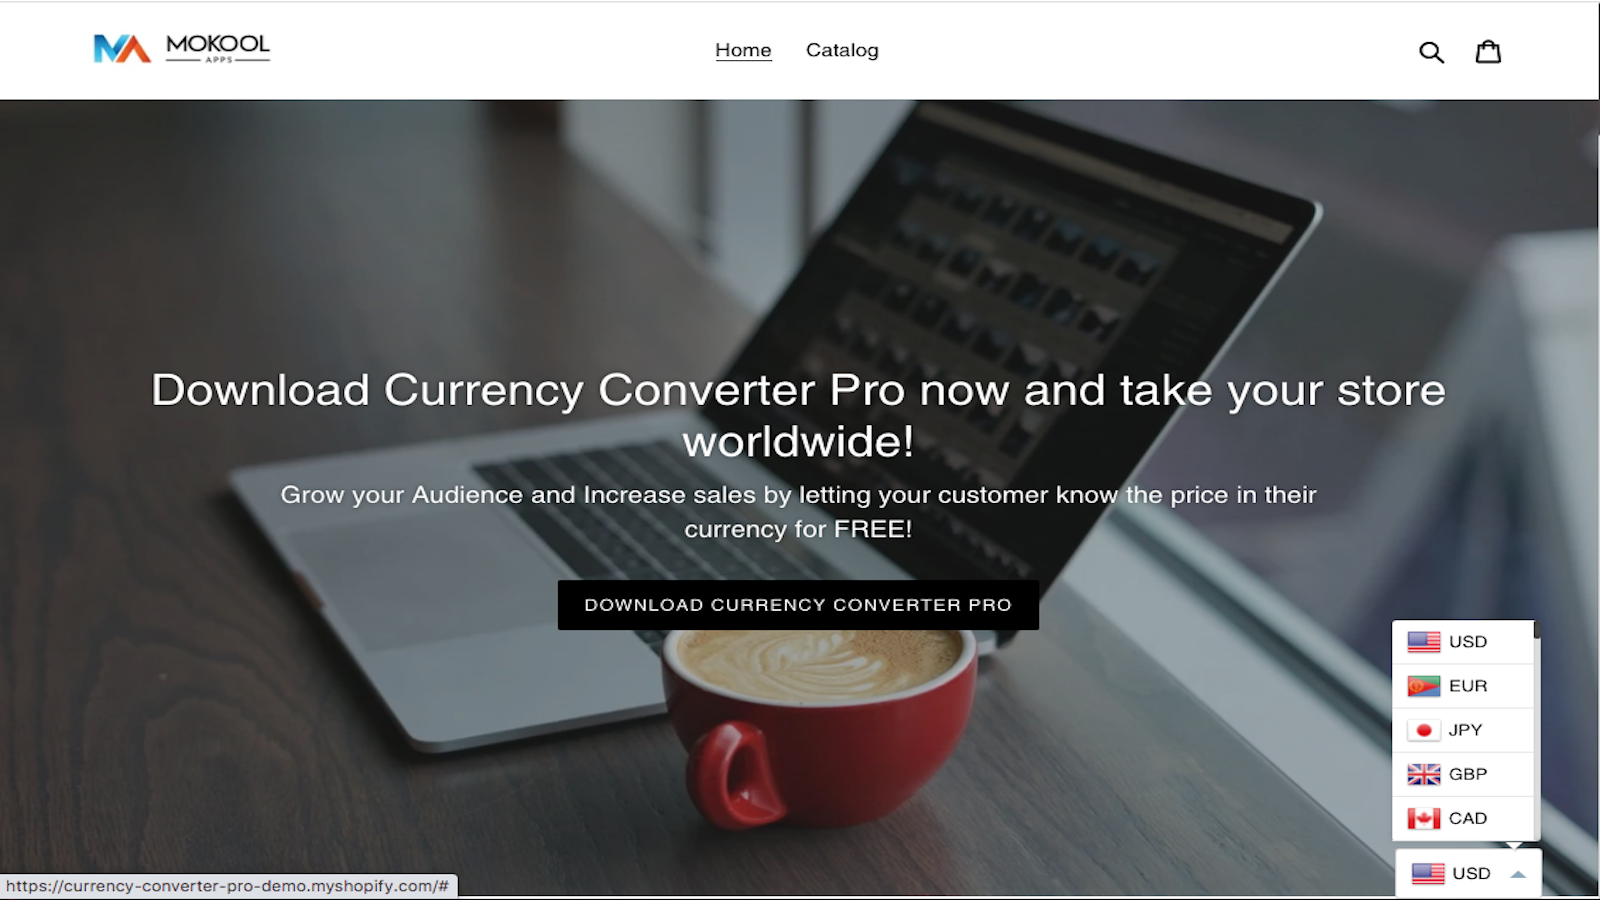 Looking Best Currency Converter offering multi currencies